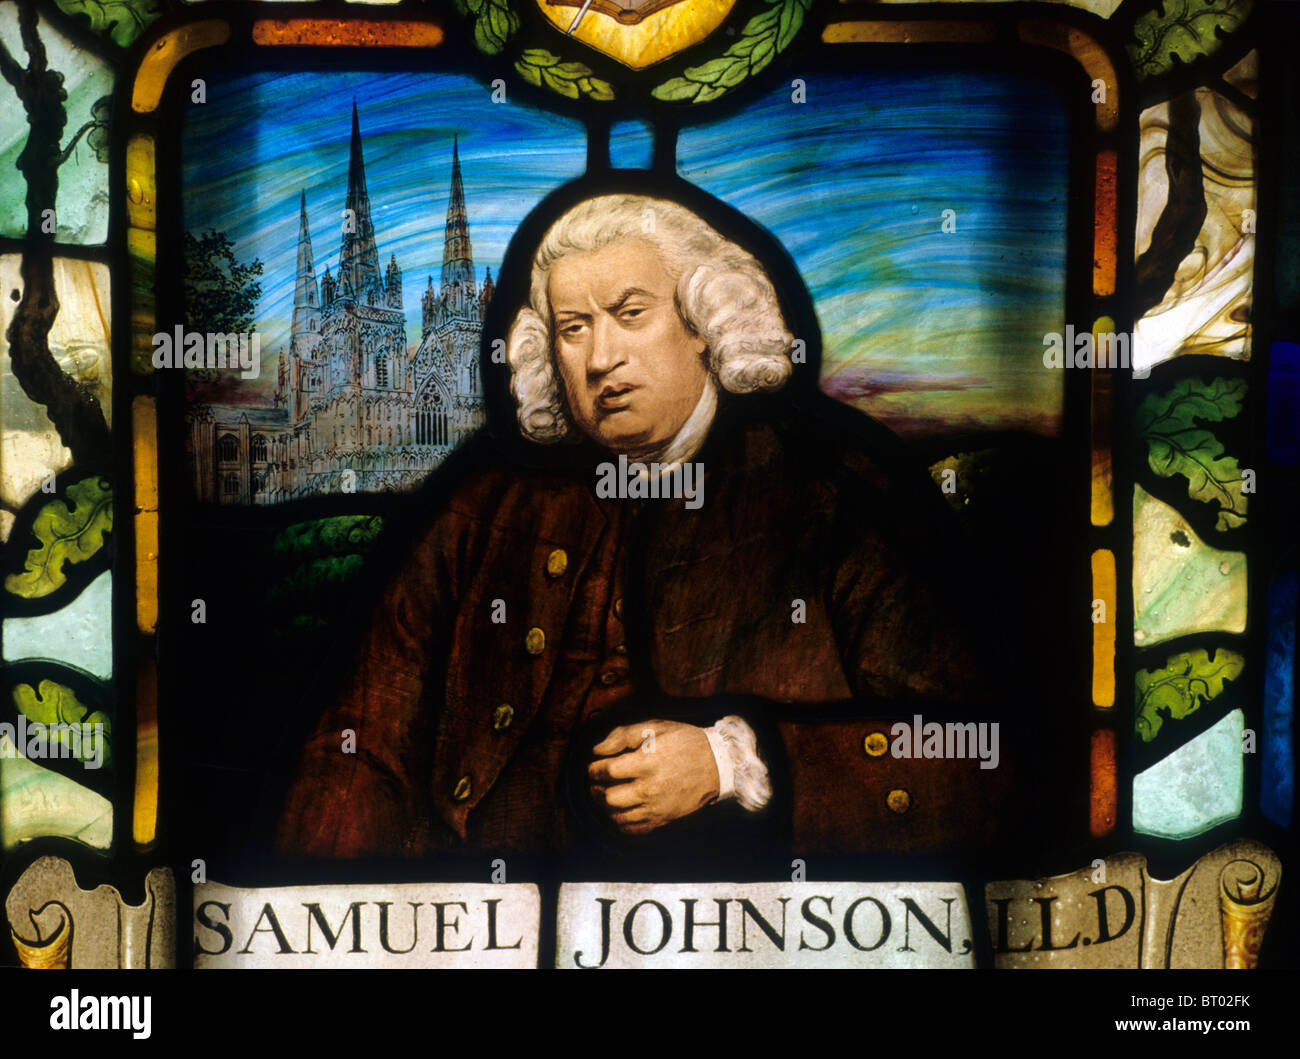 Dr. Samuel Johnson, stained glass portrait at Gough Square, London. Litchfield Cathedral in background window windows English Stock Photo